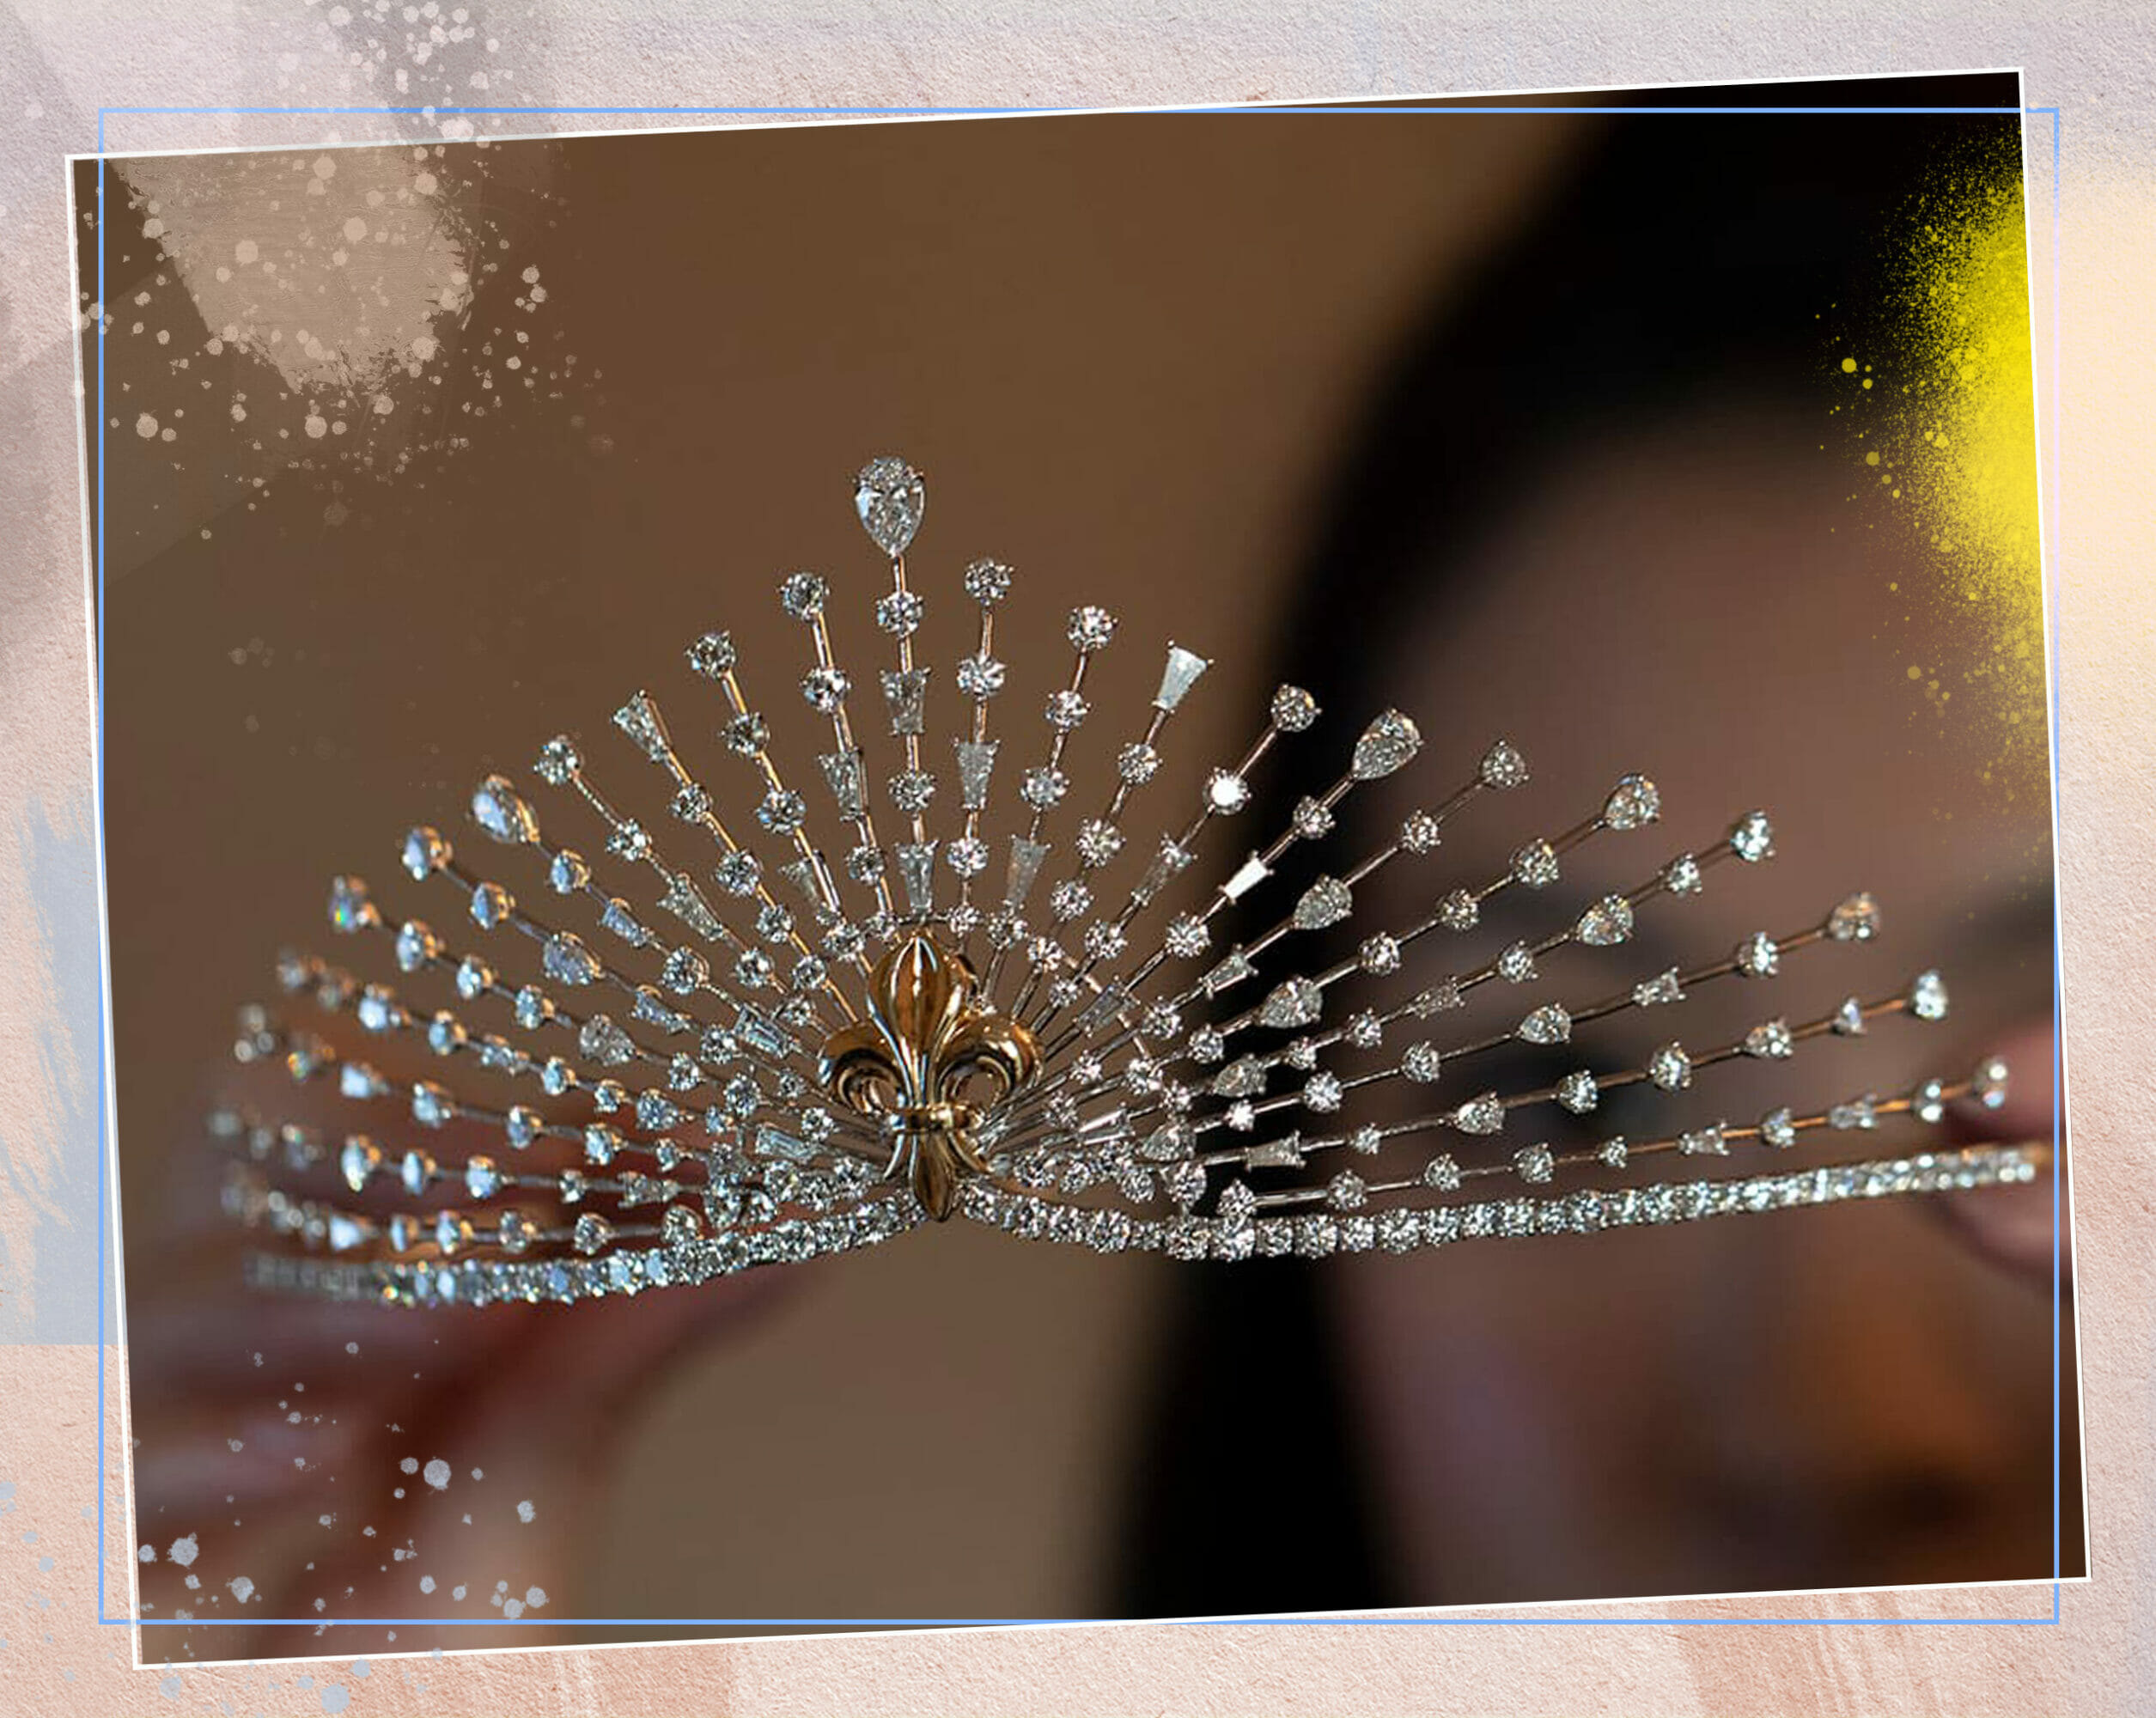 An exquisite natural diamond tiara crafted by Harakh Mehta